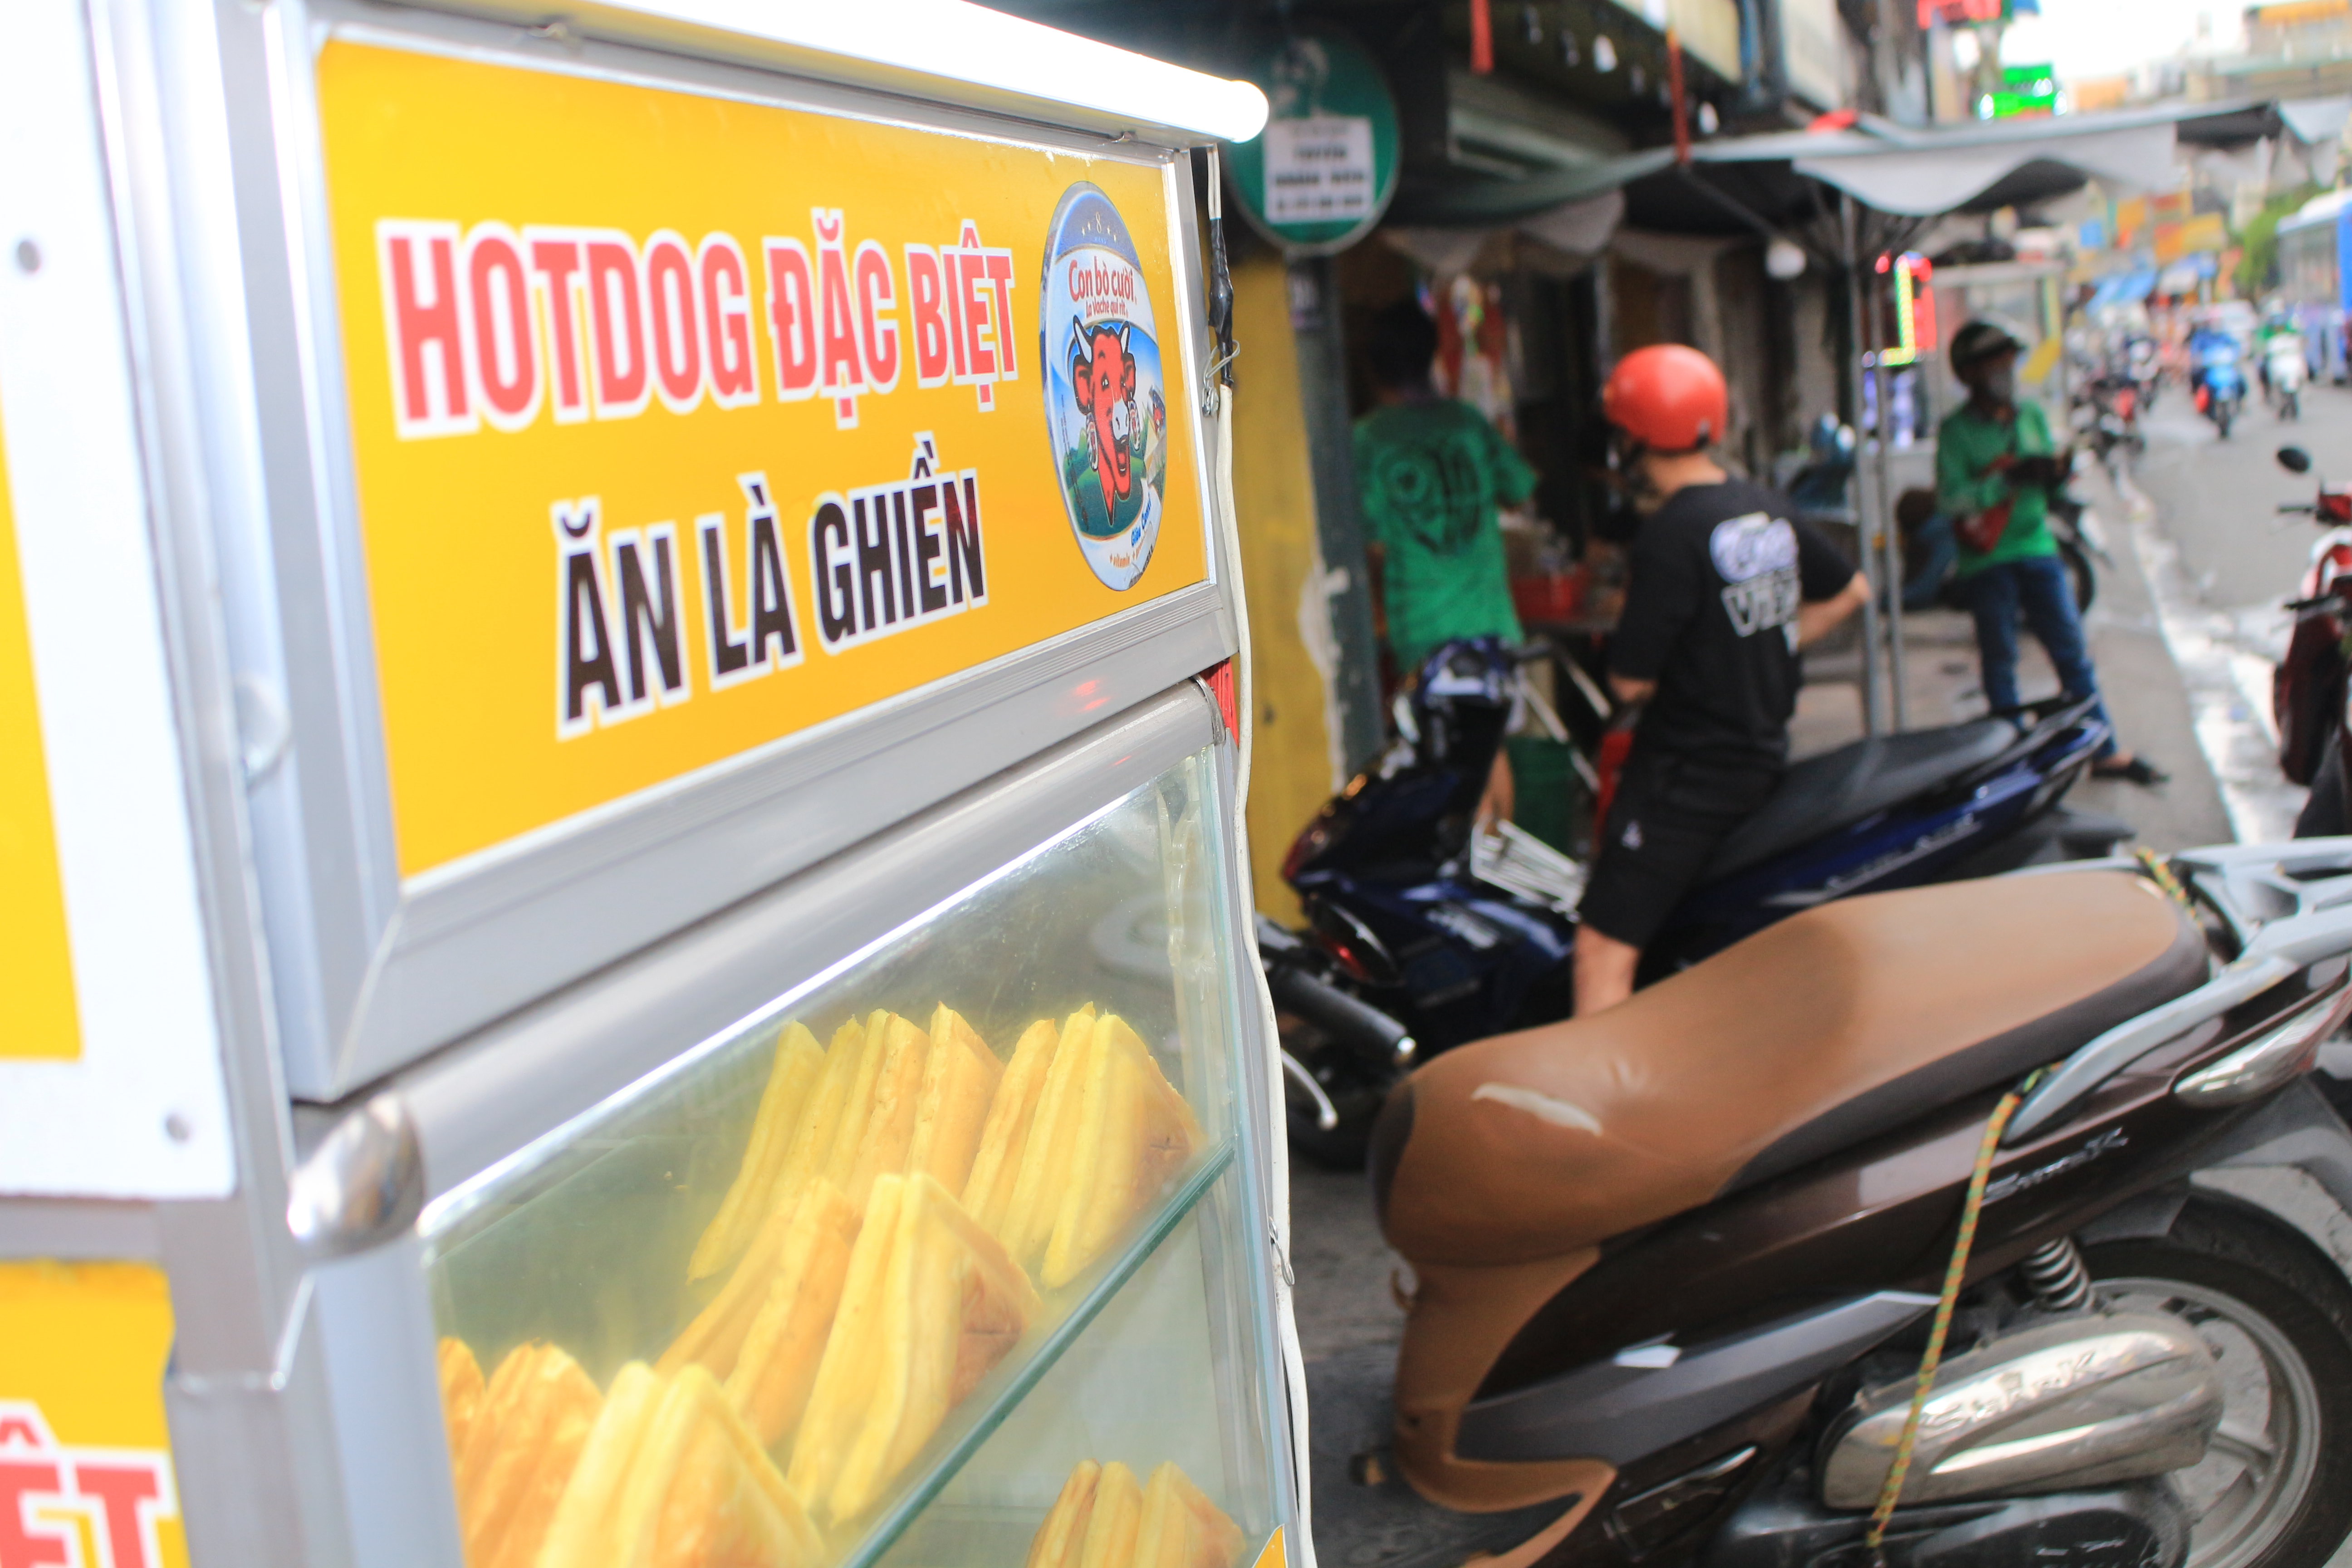 Vietnamese hot dogs are sold at a street stall in Go Vap District, Ho Chi Minh City. Photo: Ray Kuschert / Tuoi Tre News